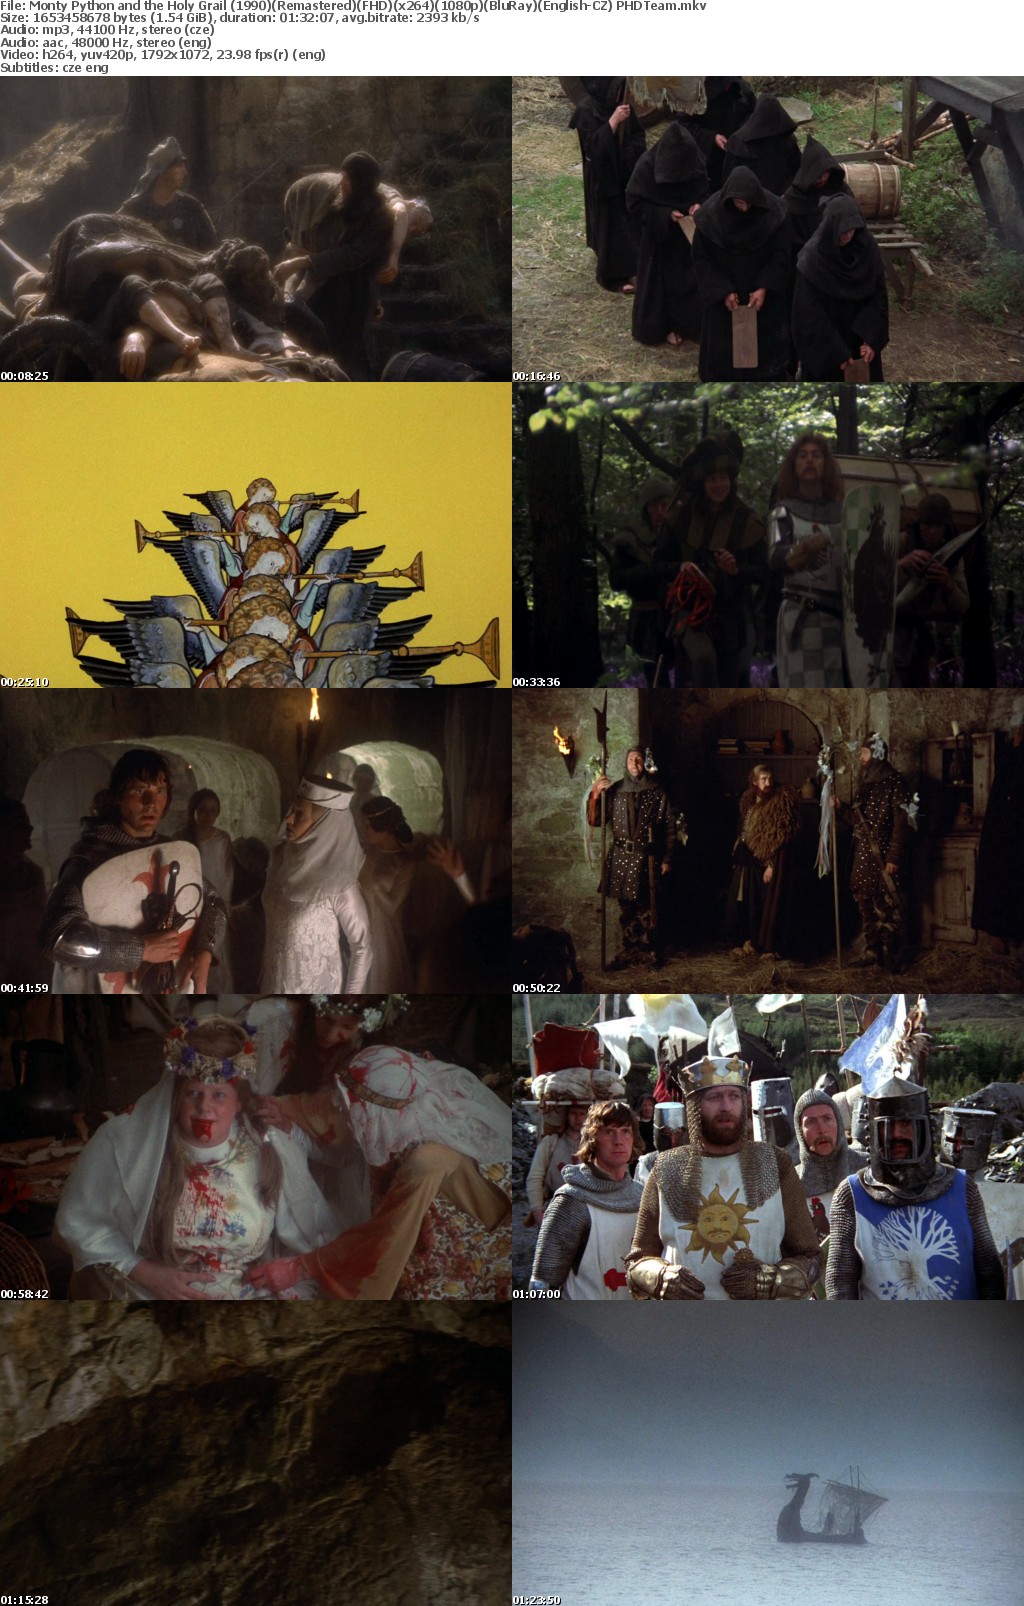 Monty Python and the Holy Grail (1990)(Remastered)(FHD)(x264)(1080p)(BluRay)(English-CZ) PHDTeam